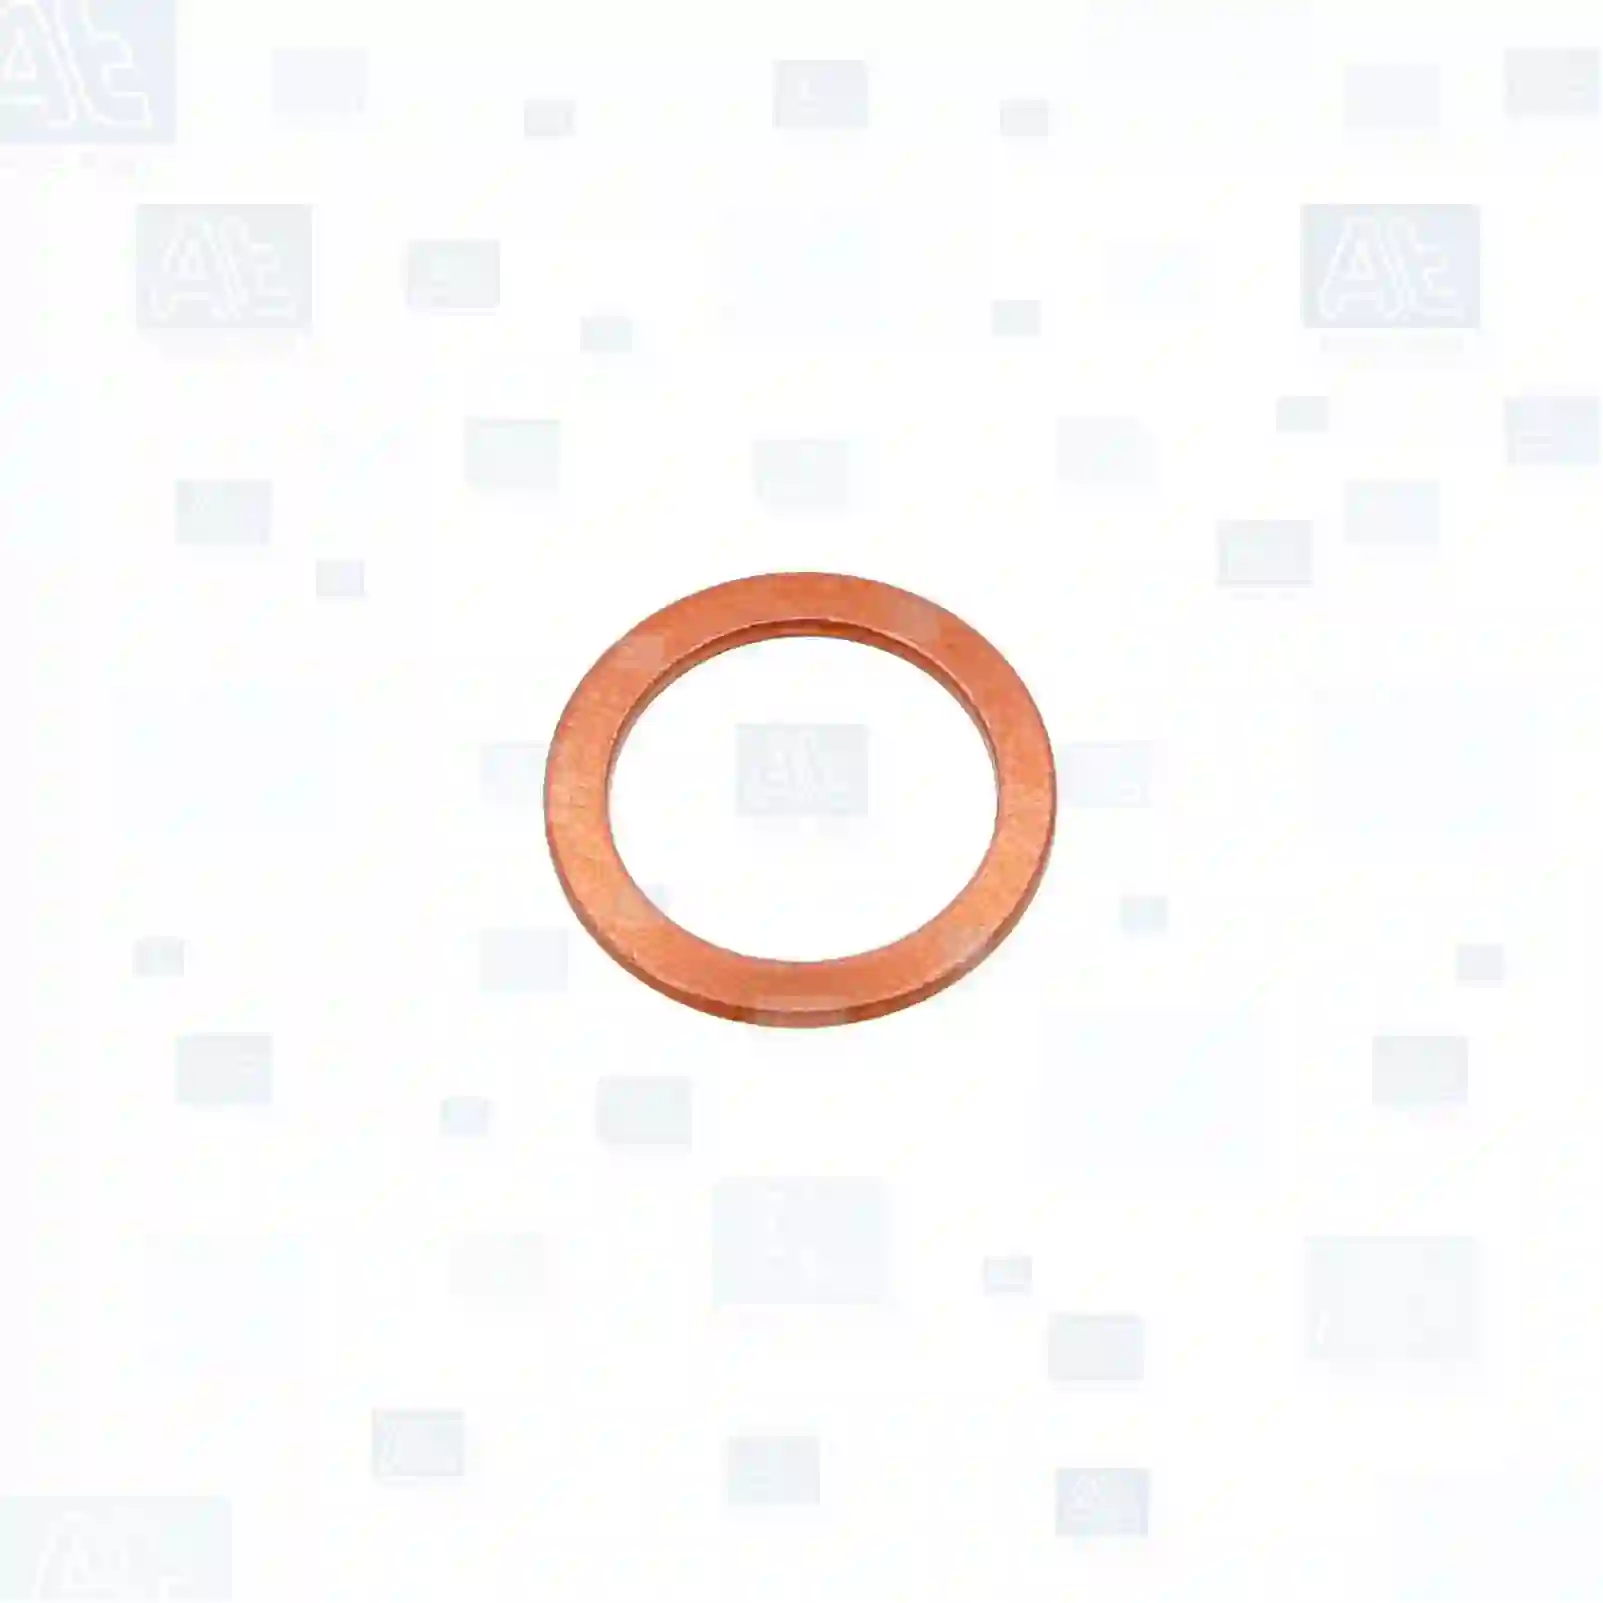 Copper washer, 77725019, N0138062, 141204, 202736, 01118664, 10260160, 11016719, 0996731007, N007603010103, 933087R2, 09916210, 10260160, 9916210, 01118664, 06561800715, 007603010103, 007603010110, 007603010404, 01118664, 604920101014, 2091006, 141204, 90012300320, 0122999200, 7400947281, 178562, 204466, N0138062, N0138062, 17417-79J50, 1662025, 18836, 947083, 947281, N0138062, N138062, ZG40230-0008 ||  77725019 At Spare Part | Engine, Accelerator Pedal, Camshaft, Connecting Rod, Crankcase, Crankshaft, Cylinder Head, Engine Suspension Mountings, Exhaust Manifold, Exhaust Gas Recirculation, Filter Kits, Flywheel Housing, General Overhaul Kits, Engine, Intake Manifold, Oil Cleaner, Oil Cooler, Oil Filter, Oil Pump, Oil Sump, Piston & Liner, Sensor & Switch, Timing Case, Turbocharger, Cooling System, Belt Tensioner, Coolant Filter, Coolant Pipe, Corrosion Prevention Agent, Drive, Expansion Tank, Fan, Intercooler, Monitors & Gauges, Radiator, Thermostat, V-Belt / Timing belt, Water Pump, Fuel System, Electronical Injector Unit, Feed Pump, Fuel Filter, cpl., Fuel Gauge Sender,  Fuel Line, Fuel Pump, Fuel Tank, Injection Line Kit, Injection Pump, Exhaust System, Clutch & Pedal, Gearbox, Propeller Shaft, Axles, Brake System, Hubs & Wheels, Suspension, Leaf Spring, Universal Parts / Accessories, Steering, Electrical System, Cabin Copper washer, 77725019, N0138062, 141204, 202736, 01118664, 10260160, 11016719, 0996731007, N007603010103, 933087R2, 09916210, 10260160, 9916210, 01118664, 06561800715, 007603010103, 007603010110, 007603010404, 01118664, 604920101014, 2091006, 141204, 90012300320, 0122999200, 7400947281, 178562, 204466, N0138062, N0138062, 17417-79J50, 1662025, 18836, 947083, 947281, N0138062, N138062, ZG40230-0008 ||  77725019 At Spare Part | Engine, Accelerator Pedal, Camshaft, Connecting Rod, Crankcase, Crankshaft, Cylinder Head, Engine Suspension Mountings, Exhaust Manifold, Exhaust Gas Recirculation, Filter Kits, Flywheel Housing, General Overhaul Kits, Engine, Intake Manifold, Oil Cleaner, Oil Cooler, Oil Filter, Oil Pump, Oil Sump, Piston & Liner, Sensor & Switch, Timing Case, Turbocharger, Cooling System, Belt Tensioner, Coolant Filter, Coolant Pipe, Corrosion Prevention Agent, Drive, Expansion Tank, Fan, Intercooler, Monitors & Gauges, Radiator, Thermostat, V-Belt / Timing belt, Water Pump, Fuel System, Electronical Injector Unit, Feed Pump, Fuel Filter, cpl., Fuel Gauge Sender,  Fuel Line, Fuel Pump, Fuel Tank, Injection Line Kit, Injection Pump, Exhaust System, Clutch & Pedal, Gearbox, Propeller Shaft, Axles, Brake System, Hubs & Wheels, Suspension, Leaf Spring, Universal Parts / Accessories, Steering, Electrical System, Cabin